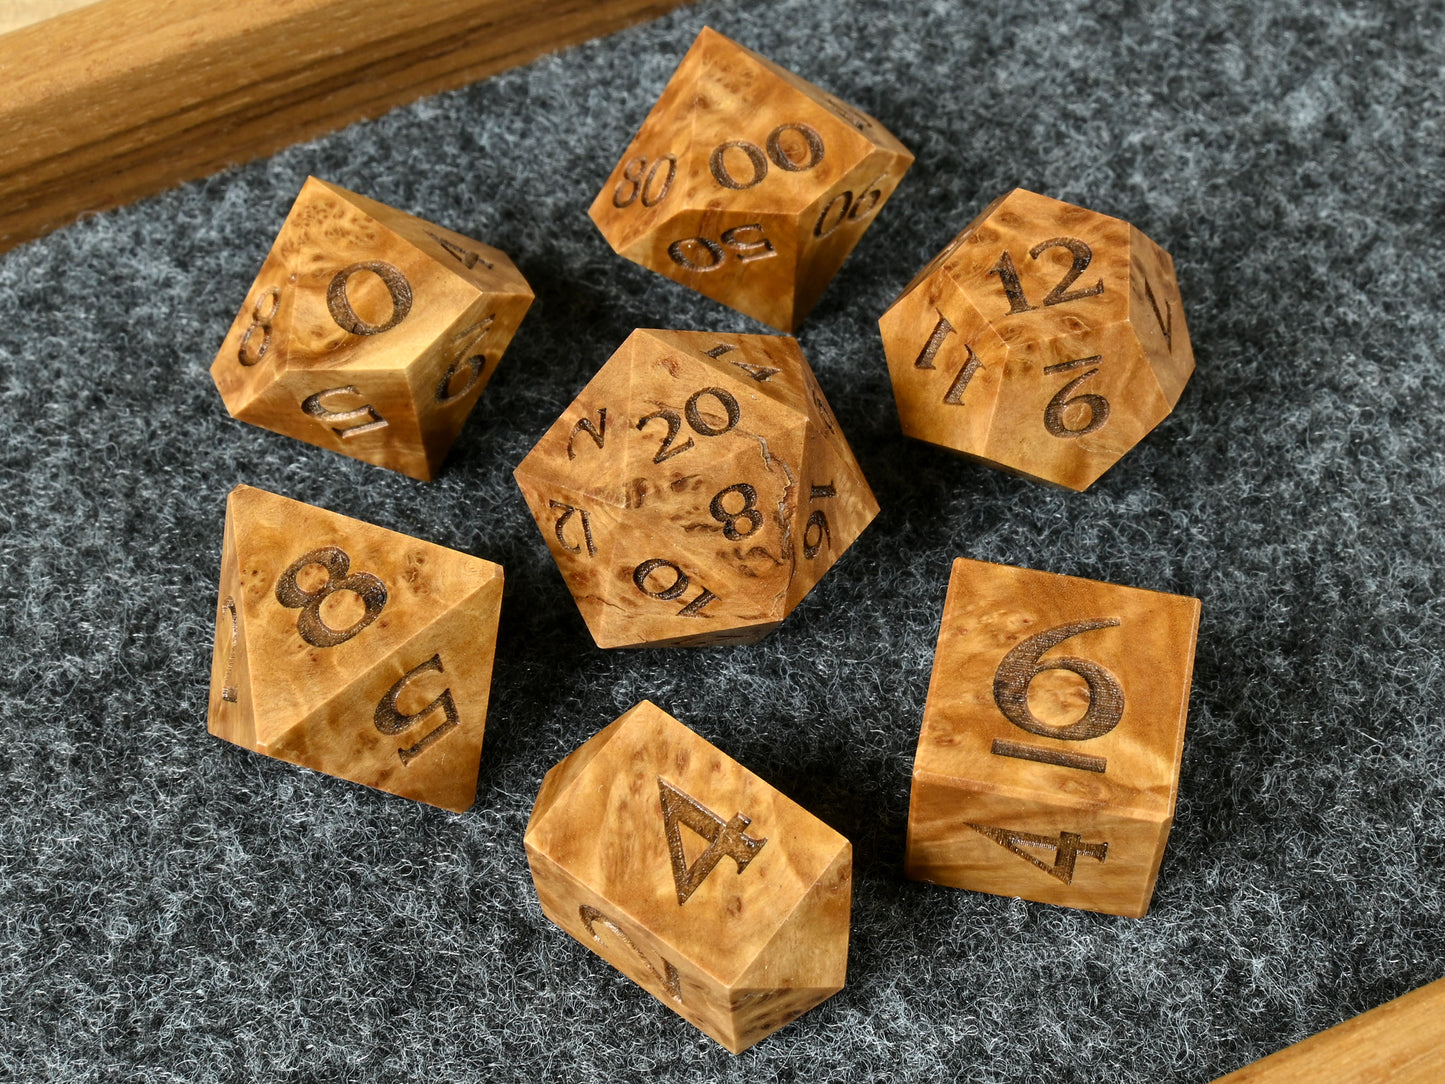 Brown Mallee burl wood dice set for dnd rpg